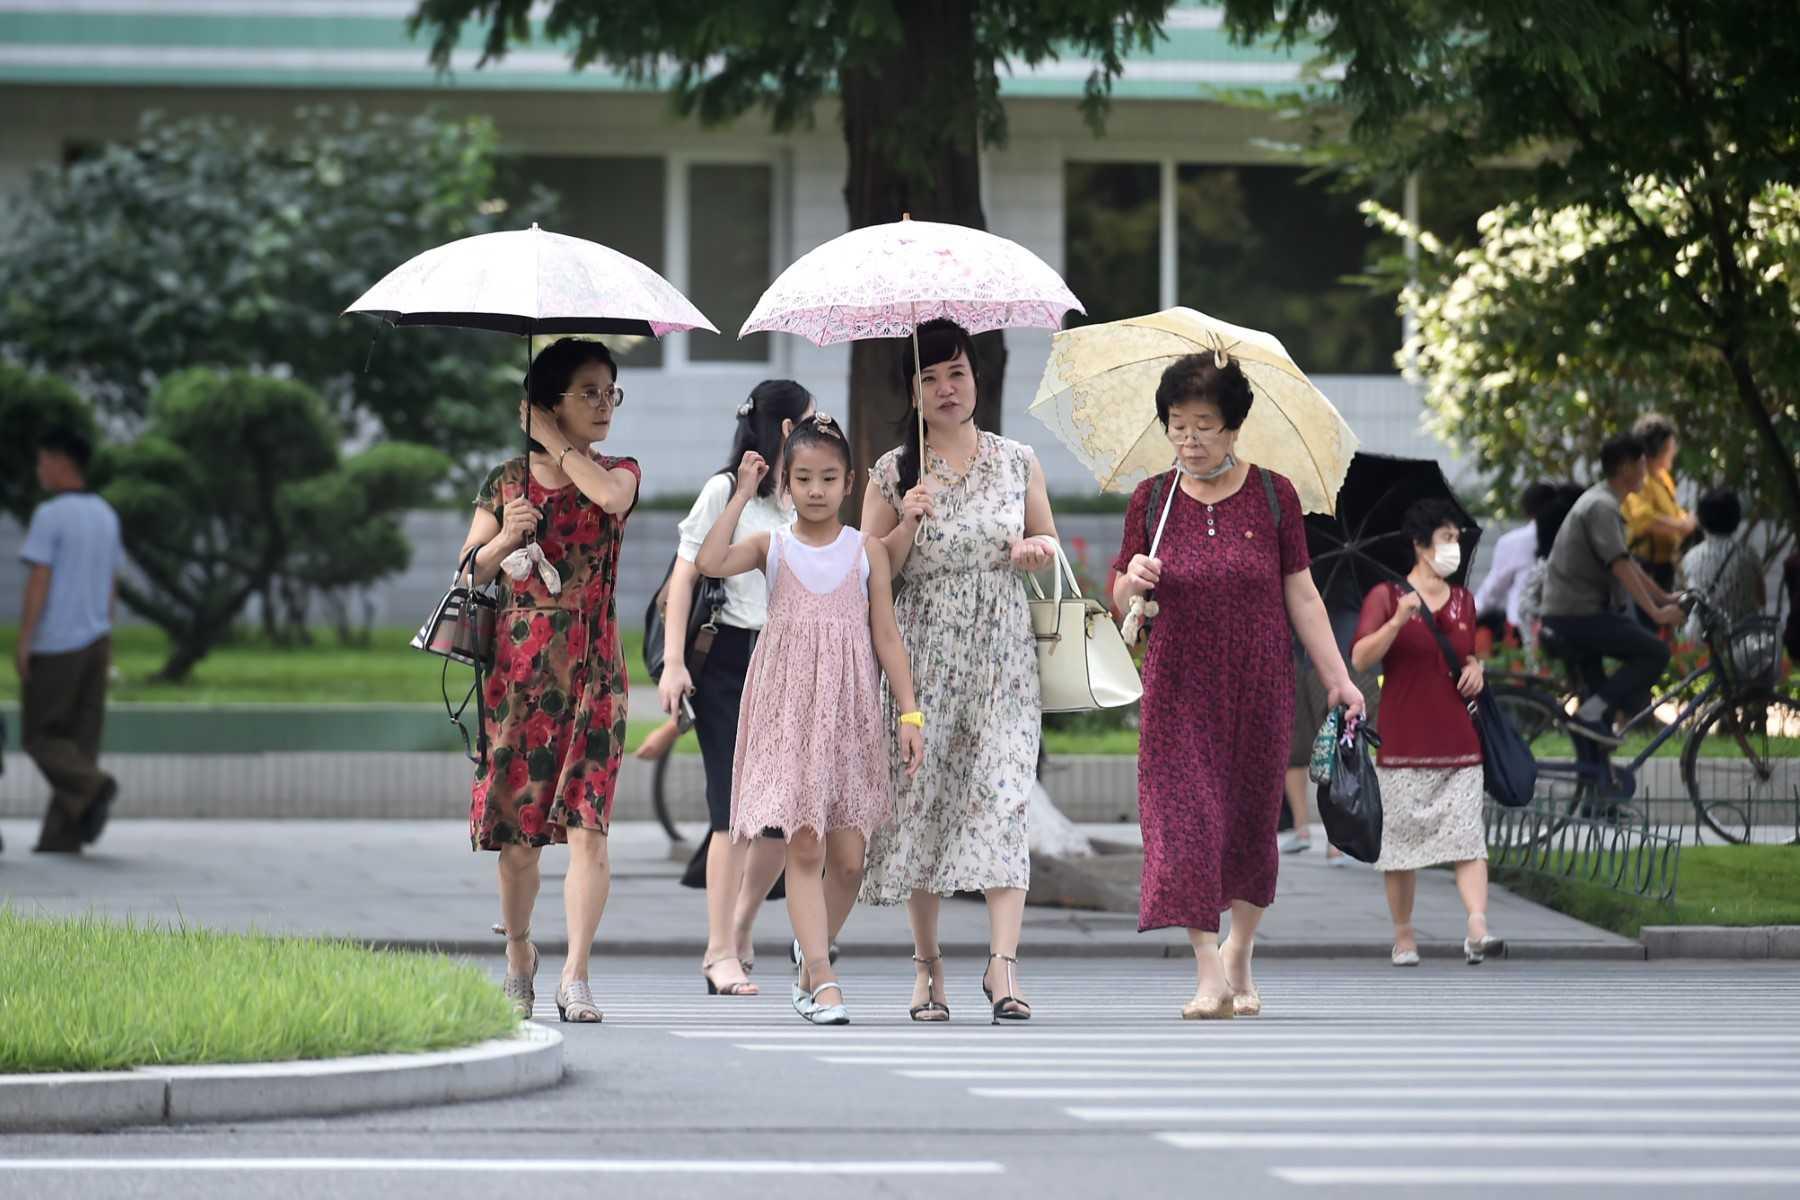 Pedestrians walk along Ryomyong street in Pyongyang on Aug 12. North Korea has never confirmed how many people caught Covid, apparently due to a lack of means to conduct widespread testing. Photo: AFP